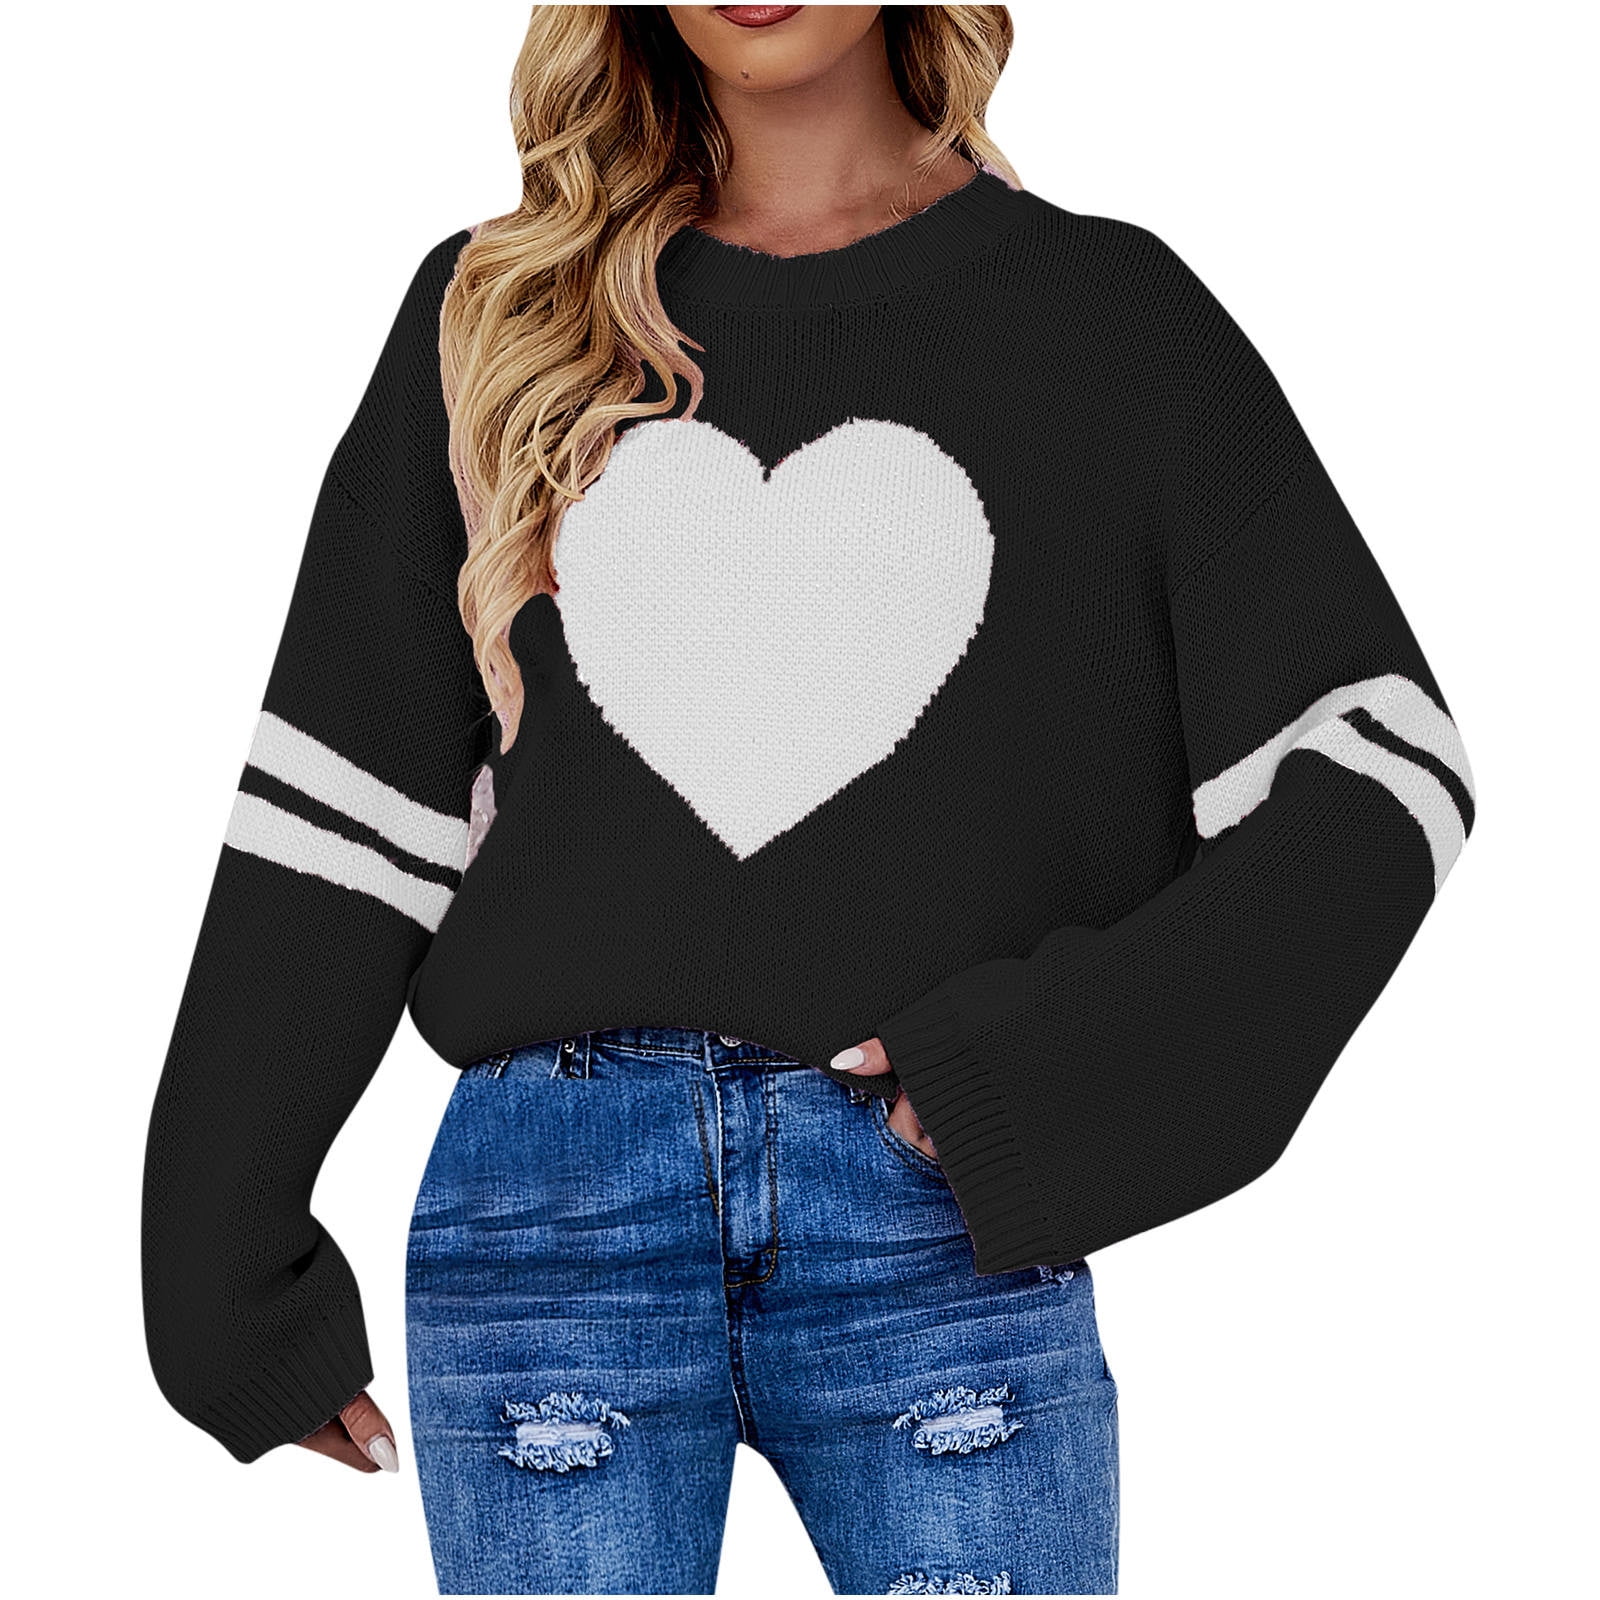 JSGEK Savings Women's Fall Fashion Crewneck Sweater Heart Graphic Print  Casual Flared Long Sleeve Knitted Pullover Jumper Tops Black S 